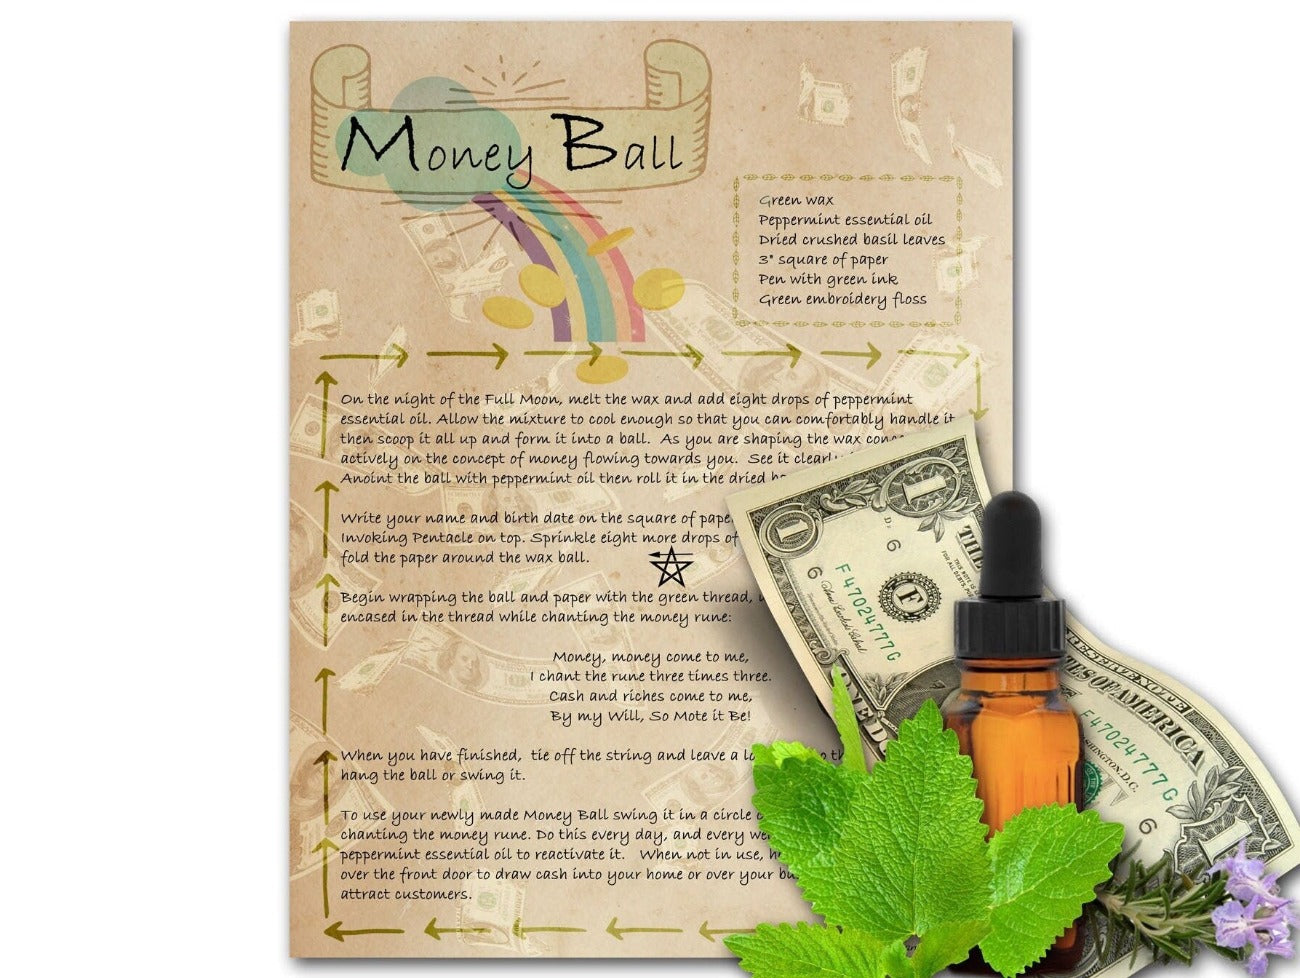 MONEY BALL a Spell of Riches, Melted Wax Spell for Prosperity, Wicca Candle Magic, Witchcraft Abundance Ritual, Gain Wealth Money Spell BOS - Morgana Magick Spell